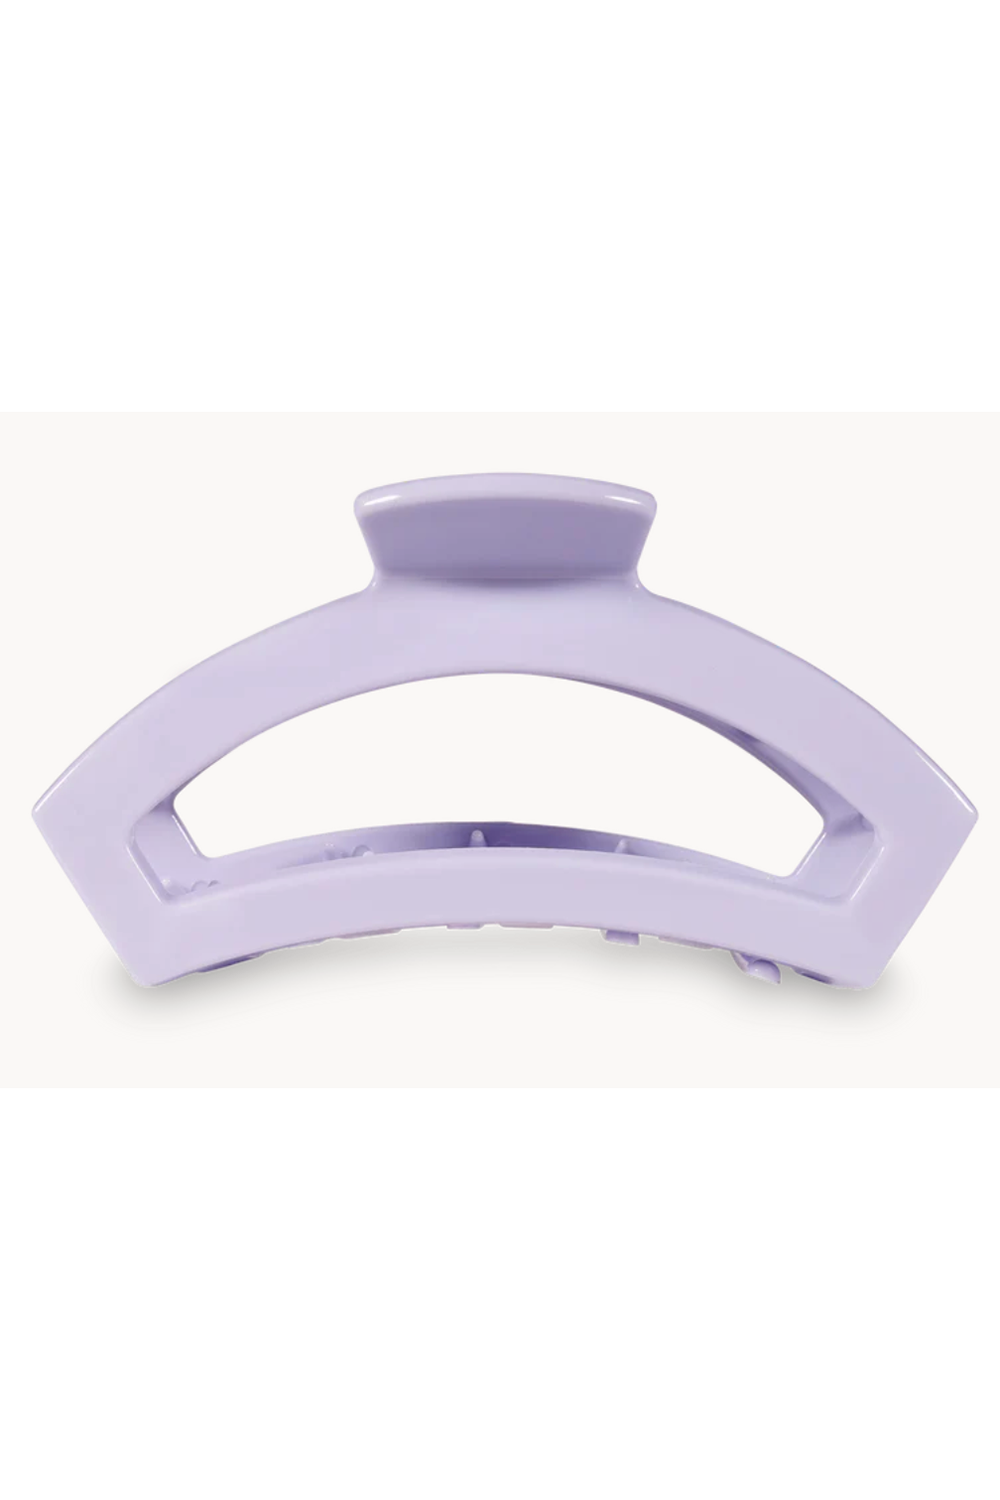 Teleties Open Hair Clip - Lilac YOU